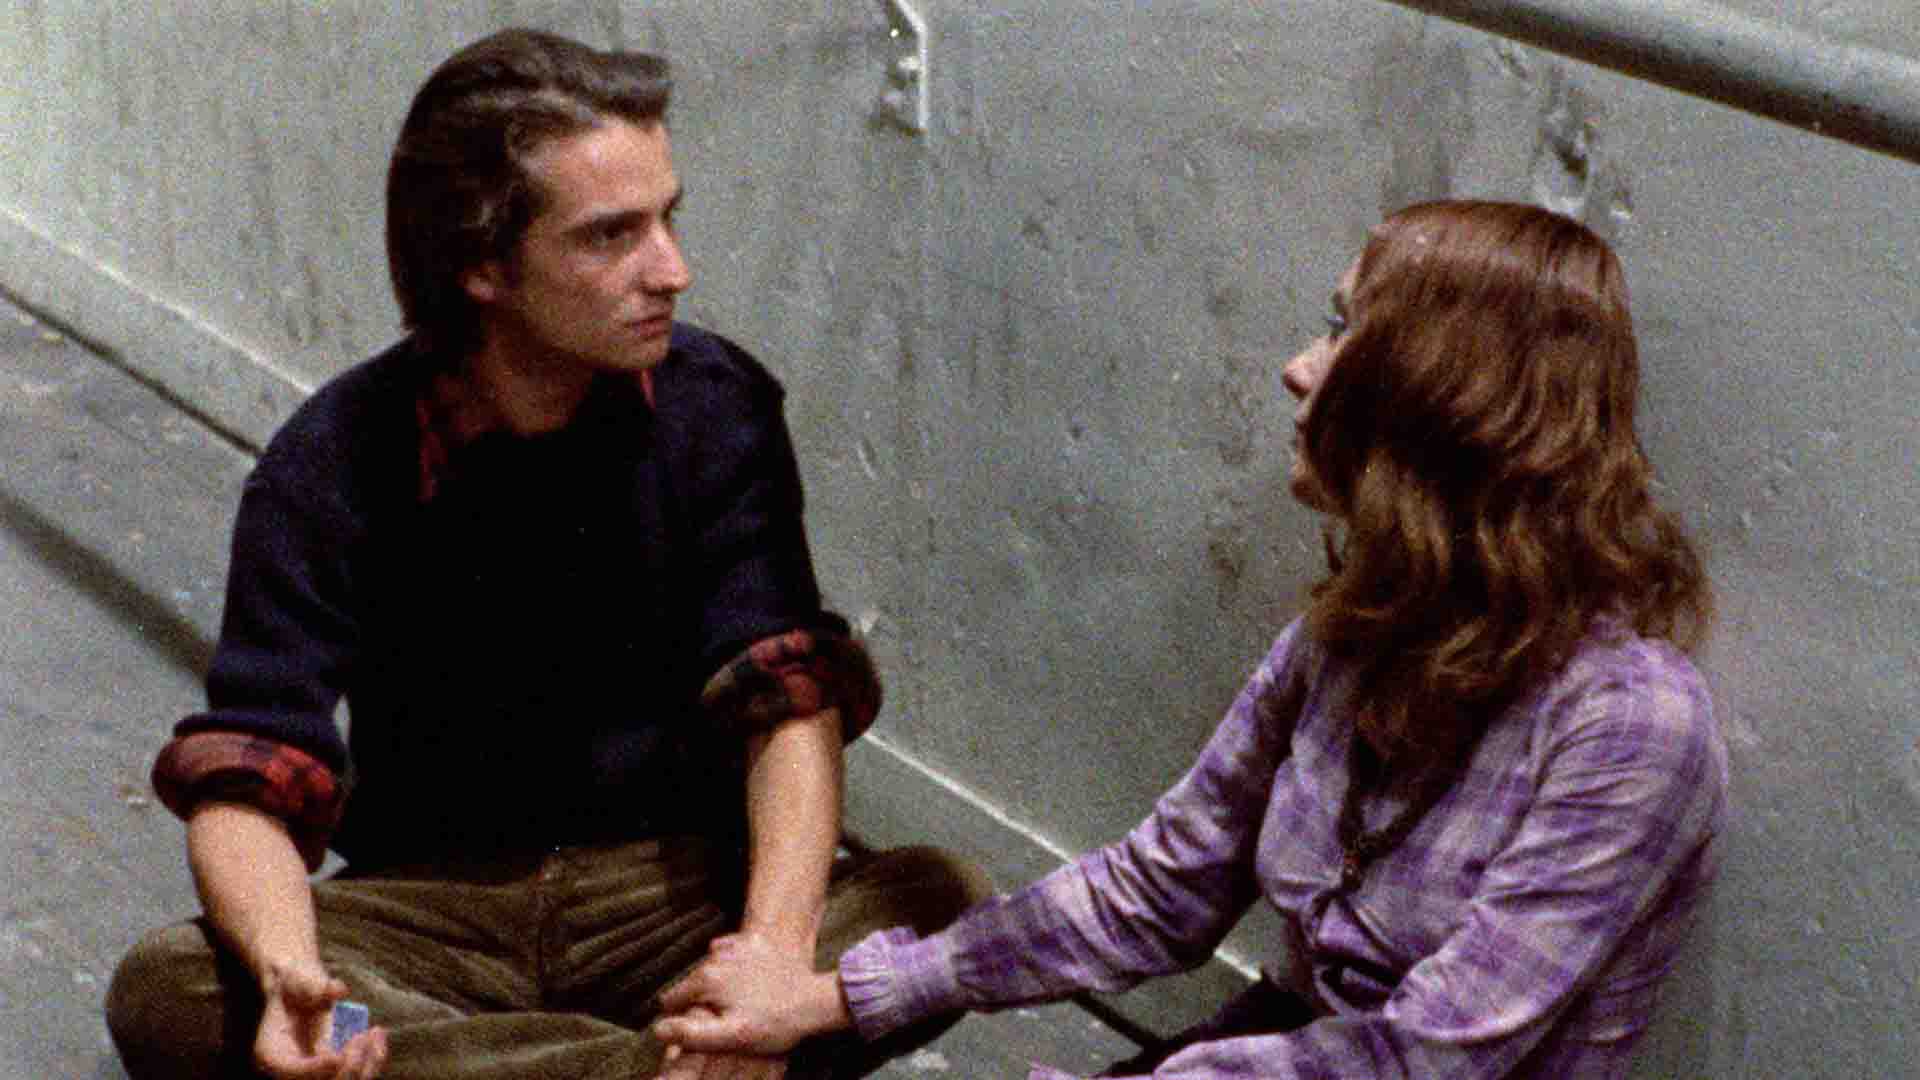 A man and a woman talking to each other in the movie Out 1